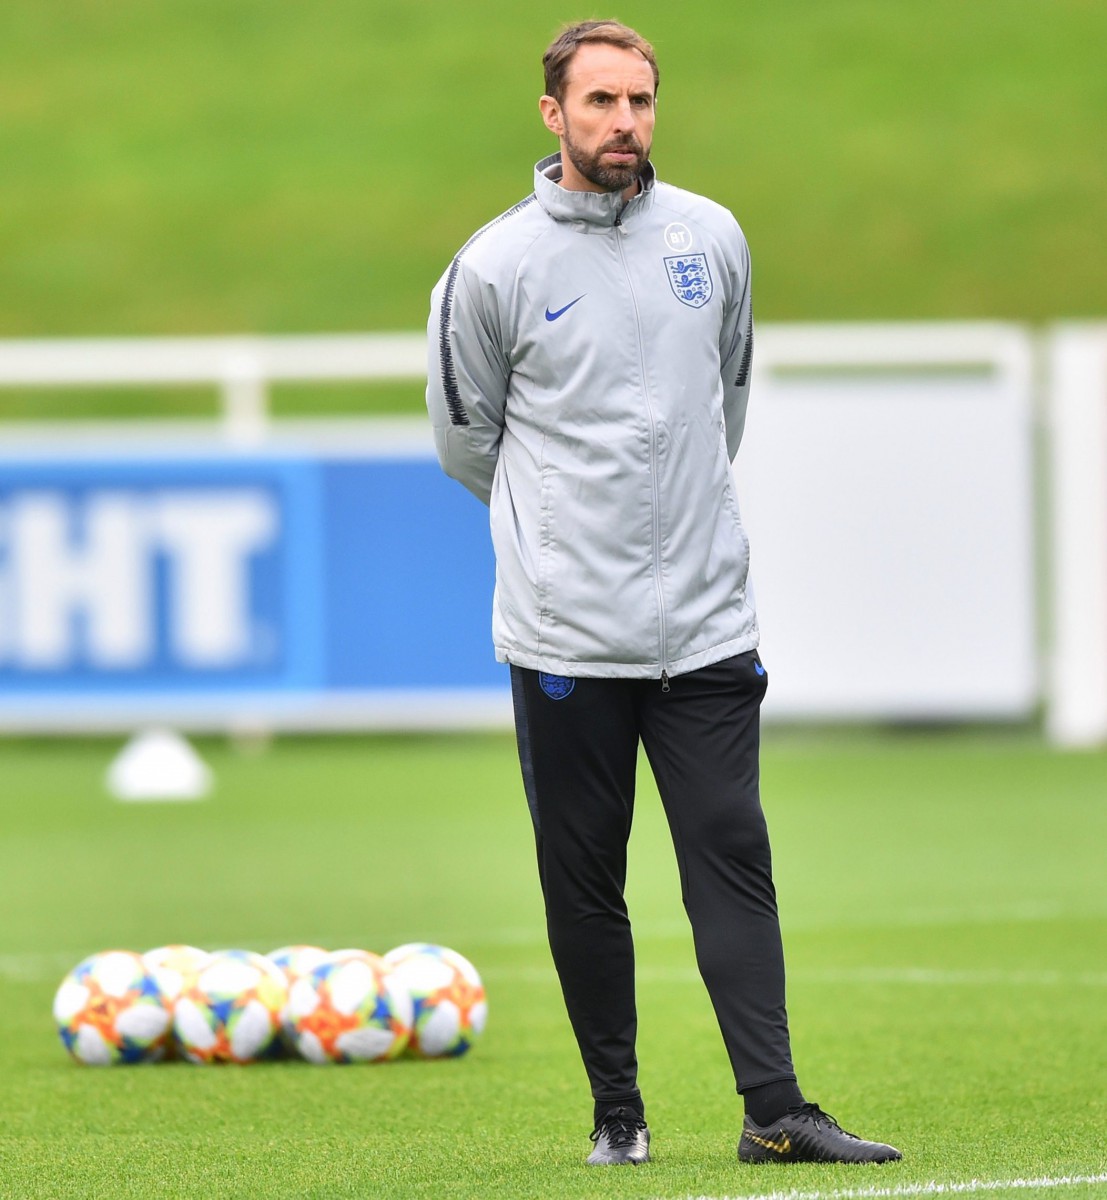 England boss Gareth Southgate has spoken out strongly against racism